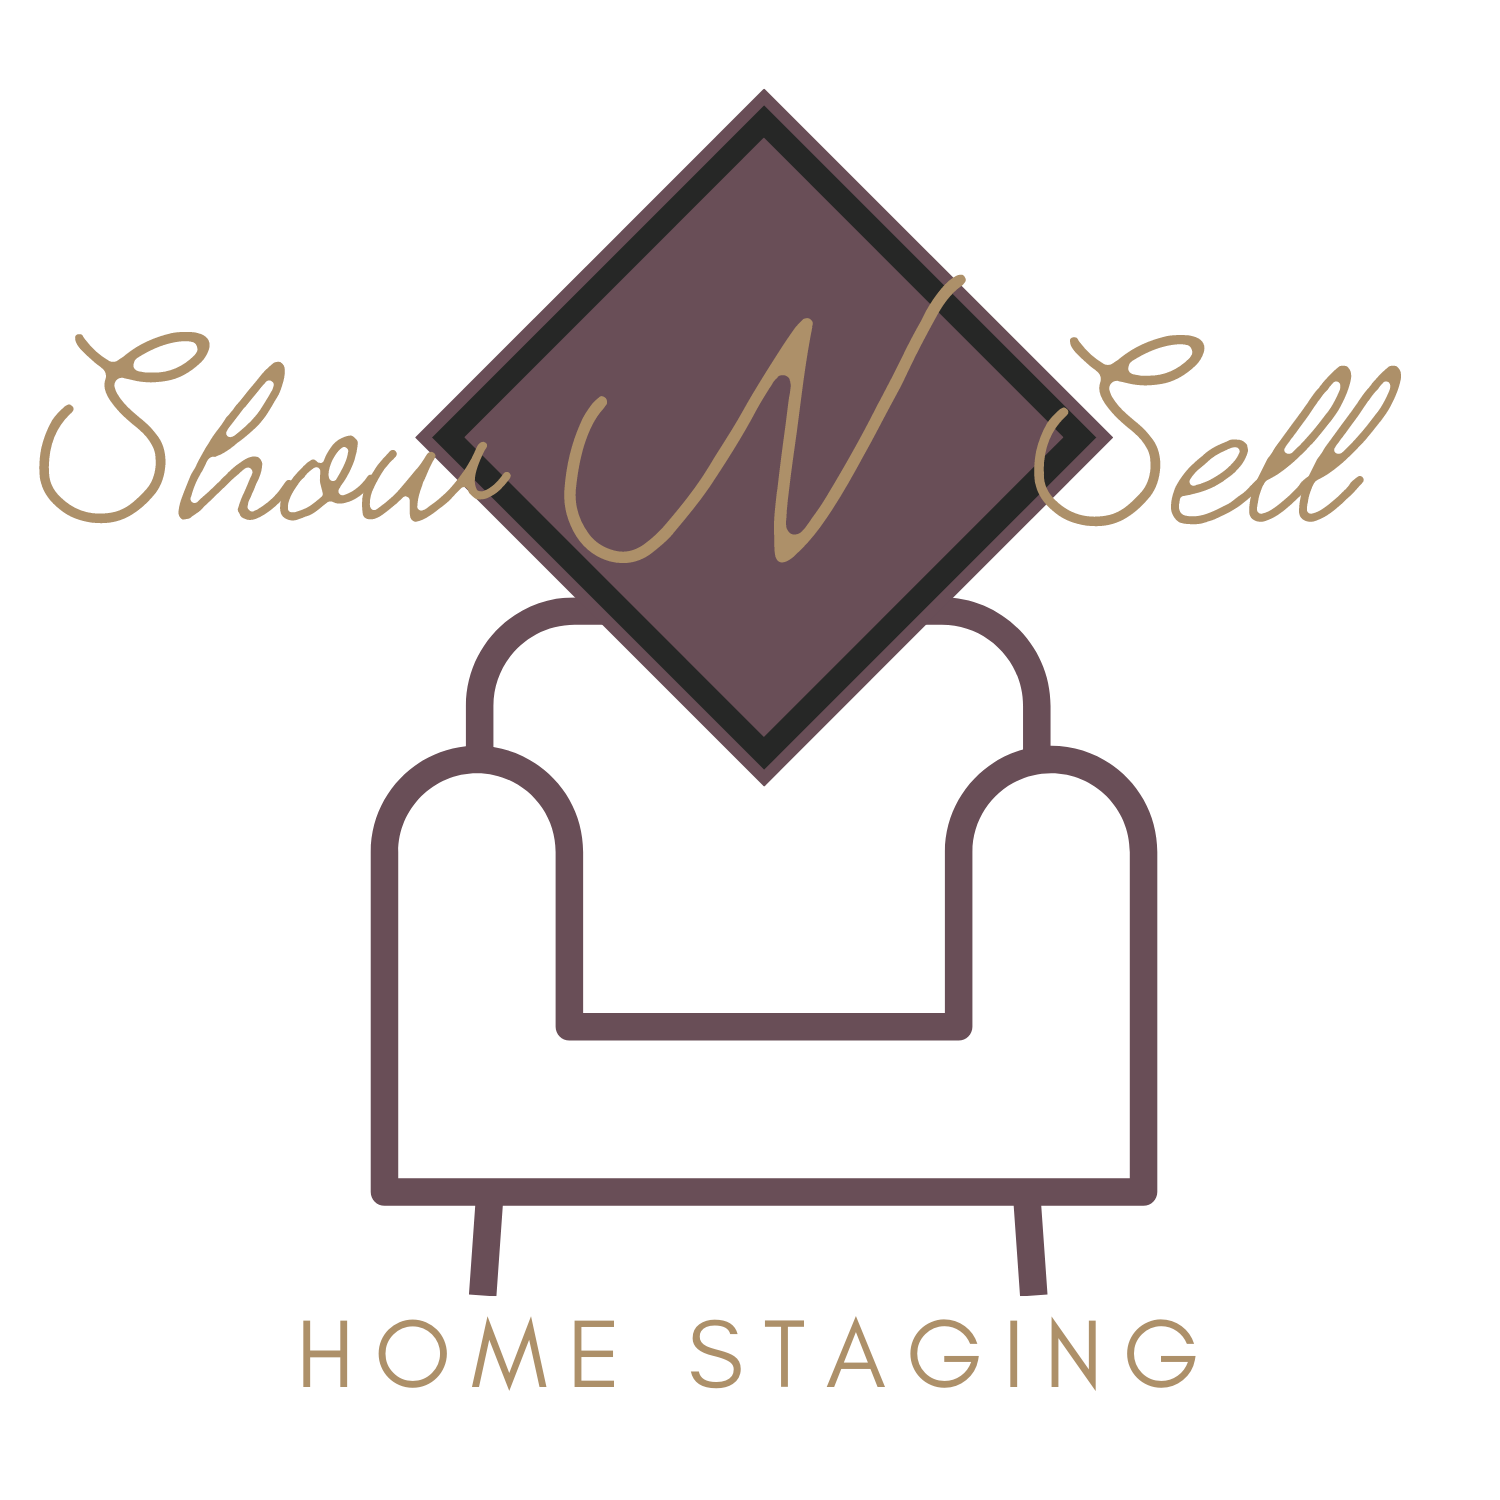 Show N Sell Home Staging